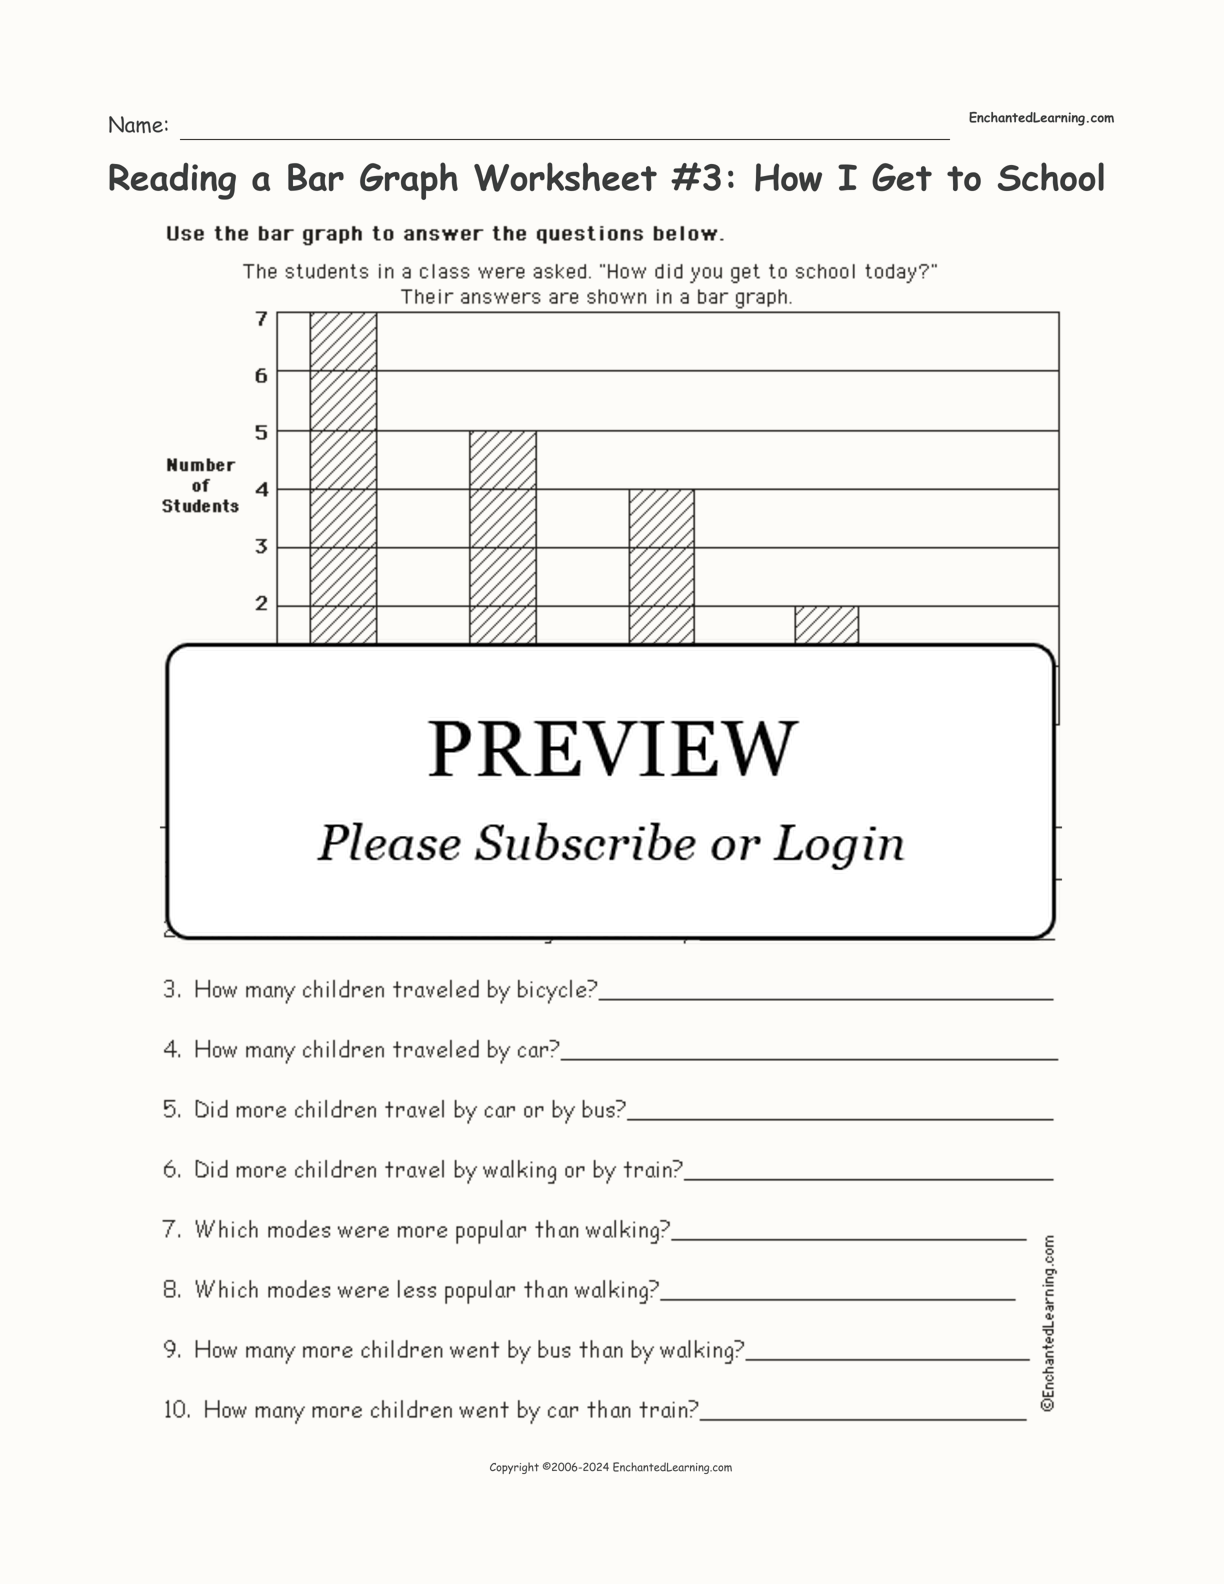 Reading a Bar Graph Worksheet #3: How I Get to School interactive worksheet page 1